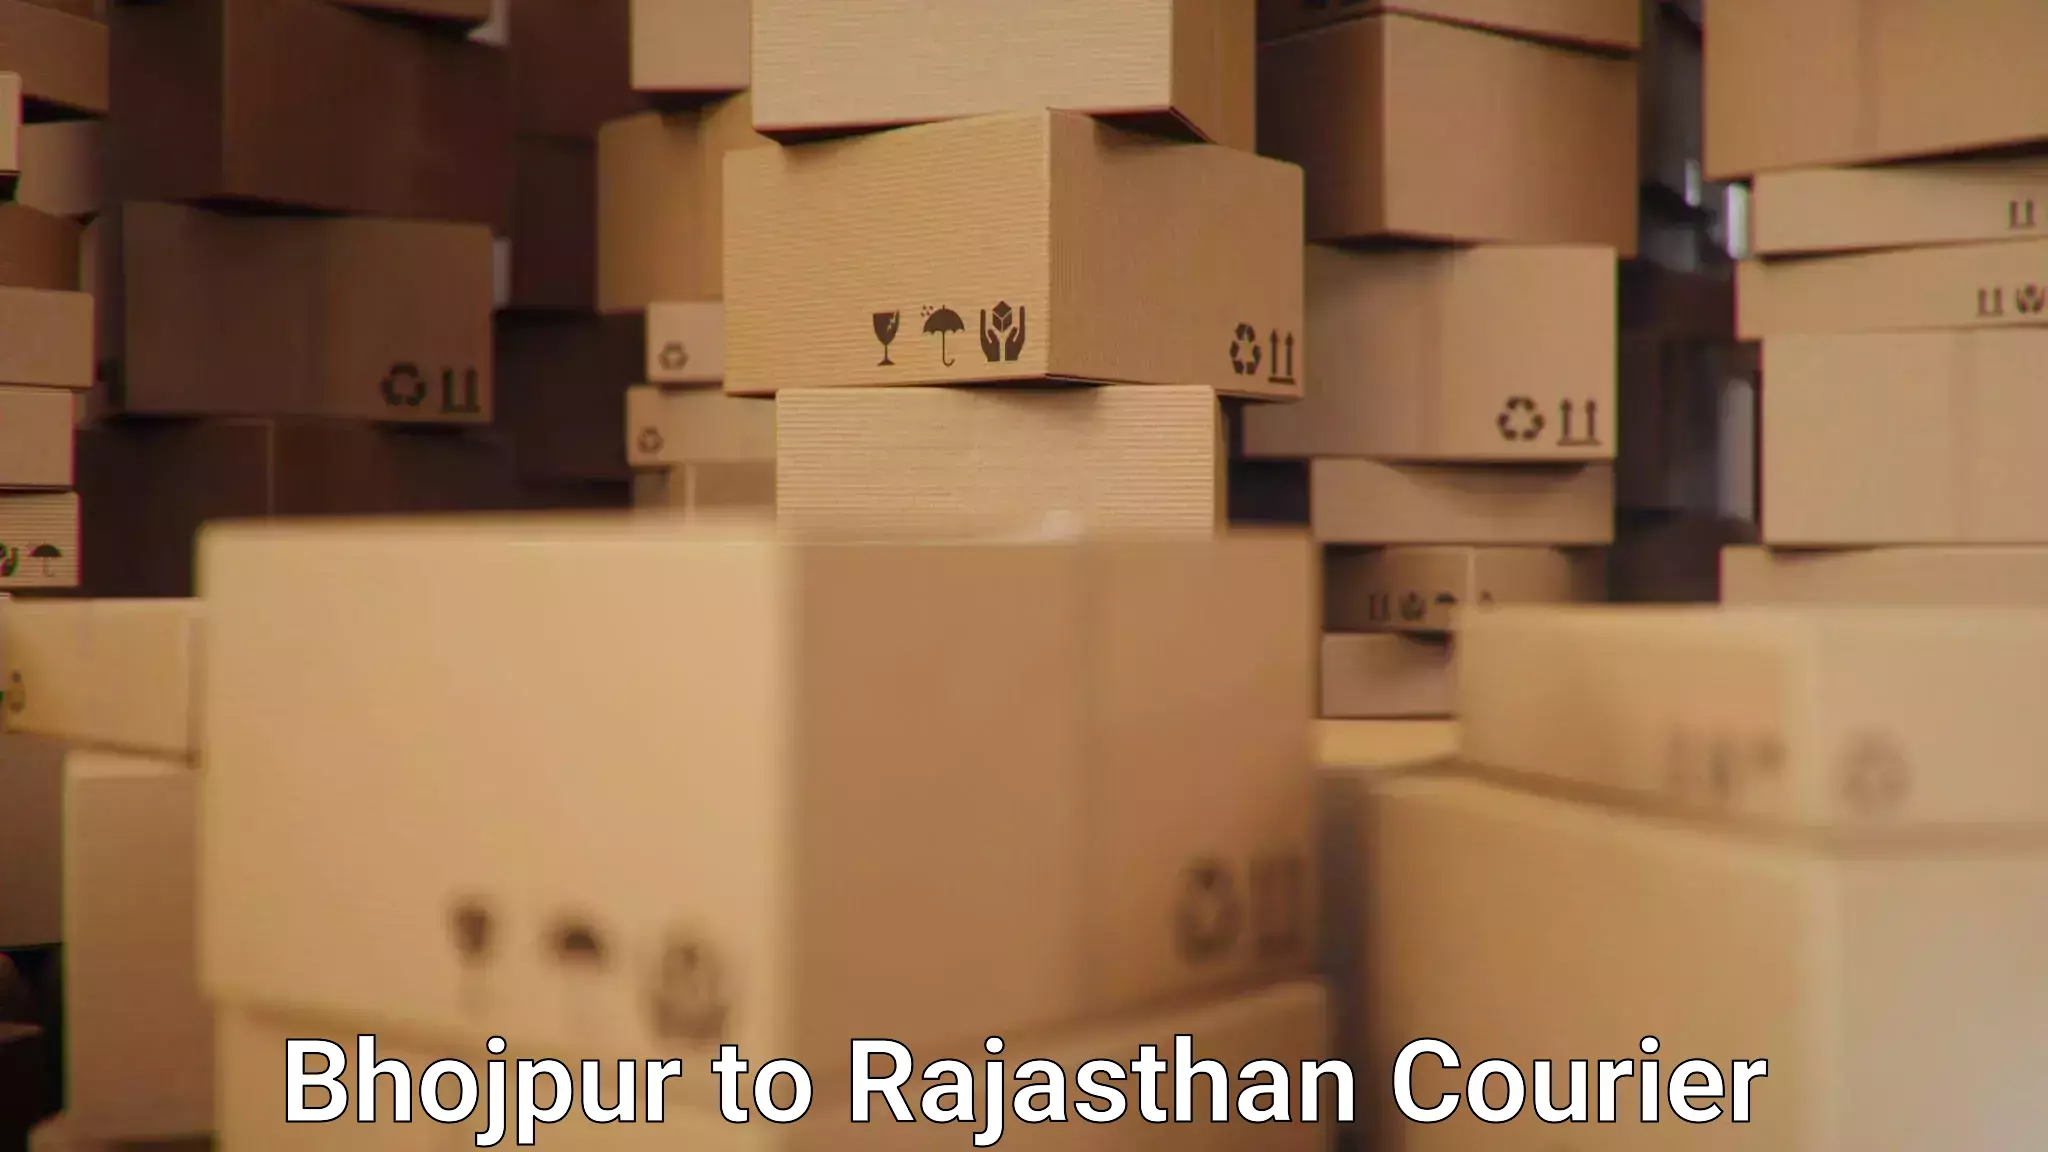 Global shipping solutions Bhojpur to Rajasthan